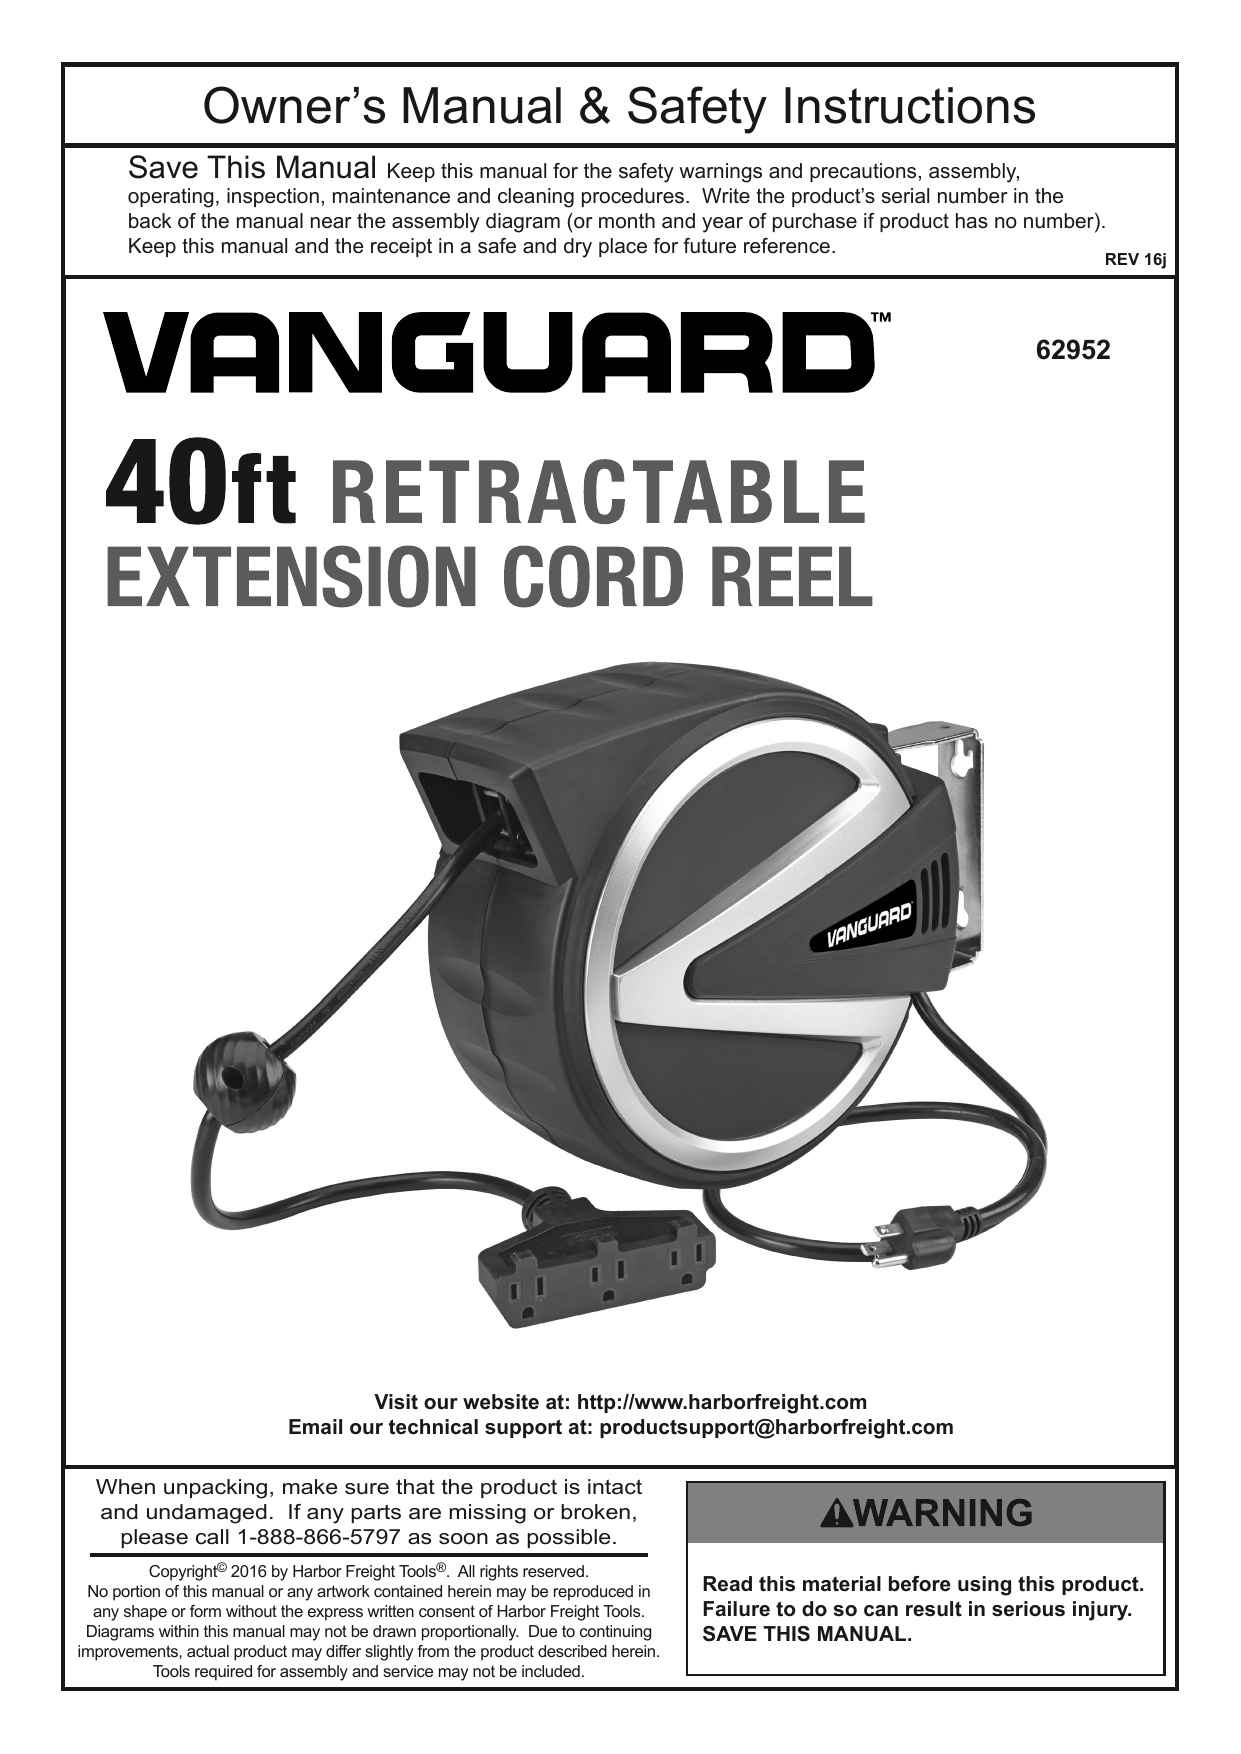 CENTRAL PNEUMATIC 64682 3-8 Inch Retractable Hose Reel Owner's Manual